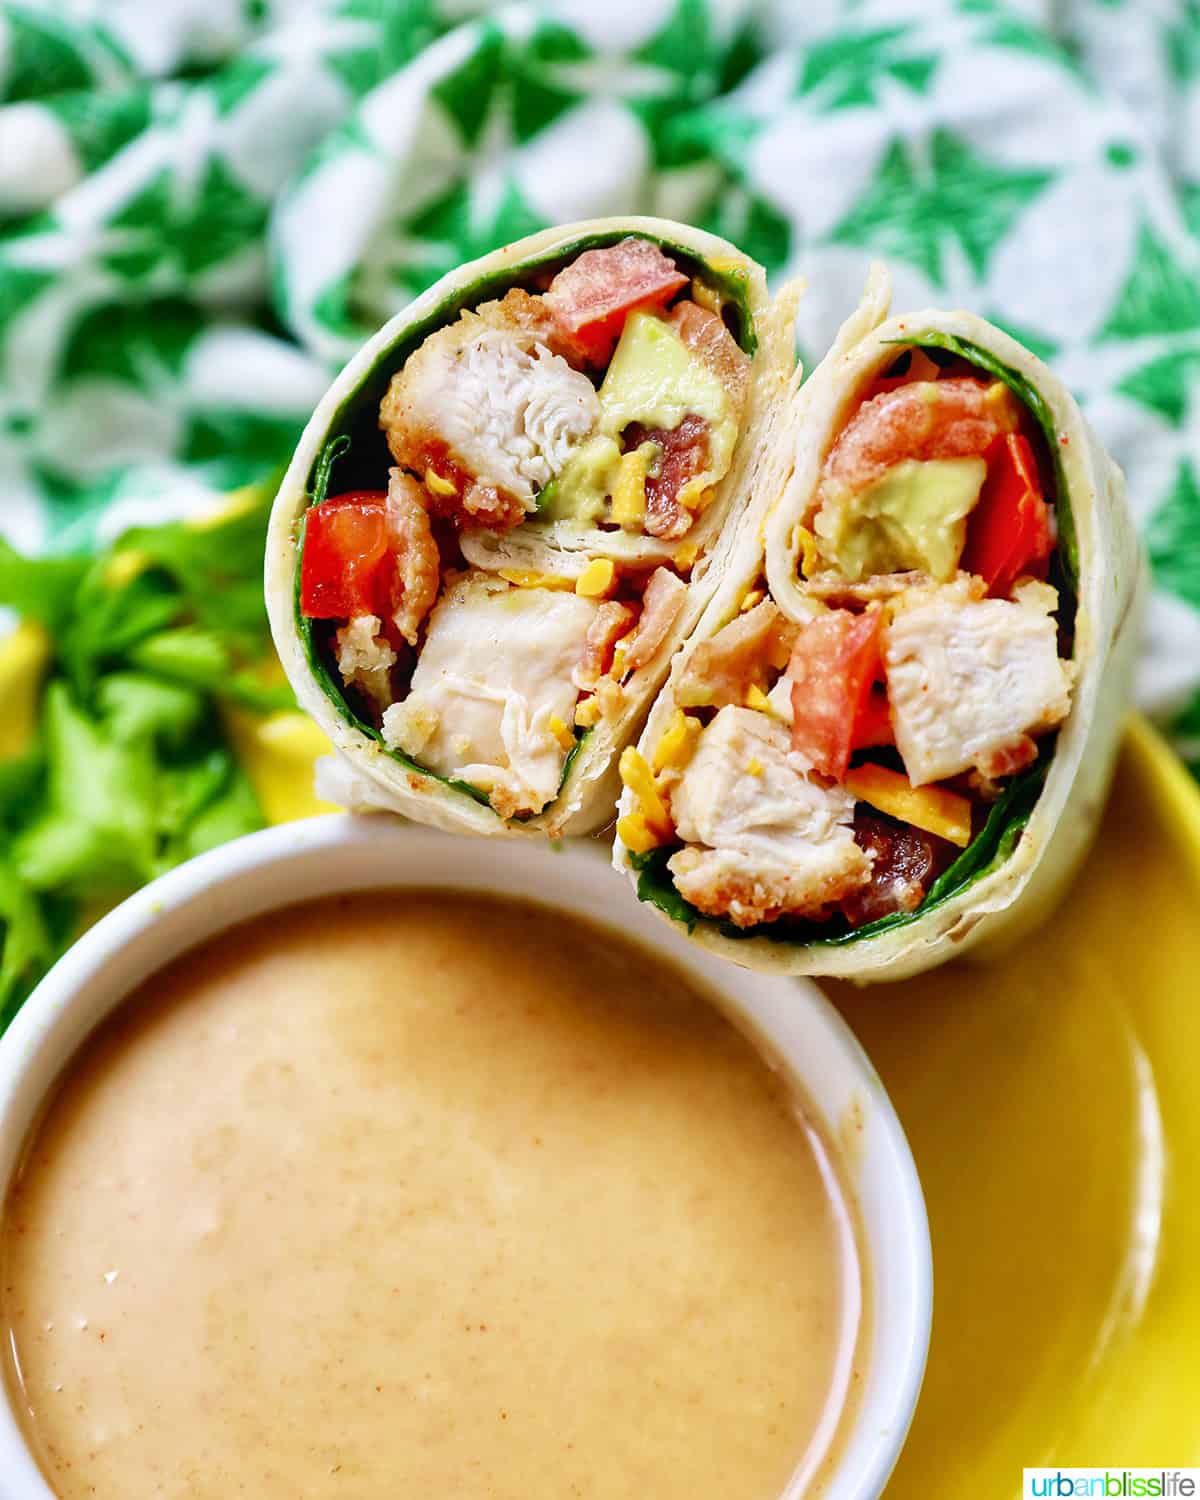 honey mustard chicken wraps sliced in half with the middle exposed next to honey mustard sauce and a green and white patterned napkin.